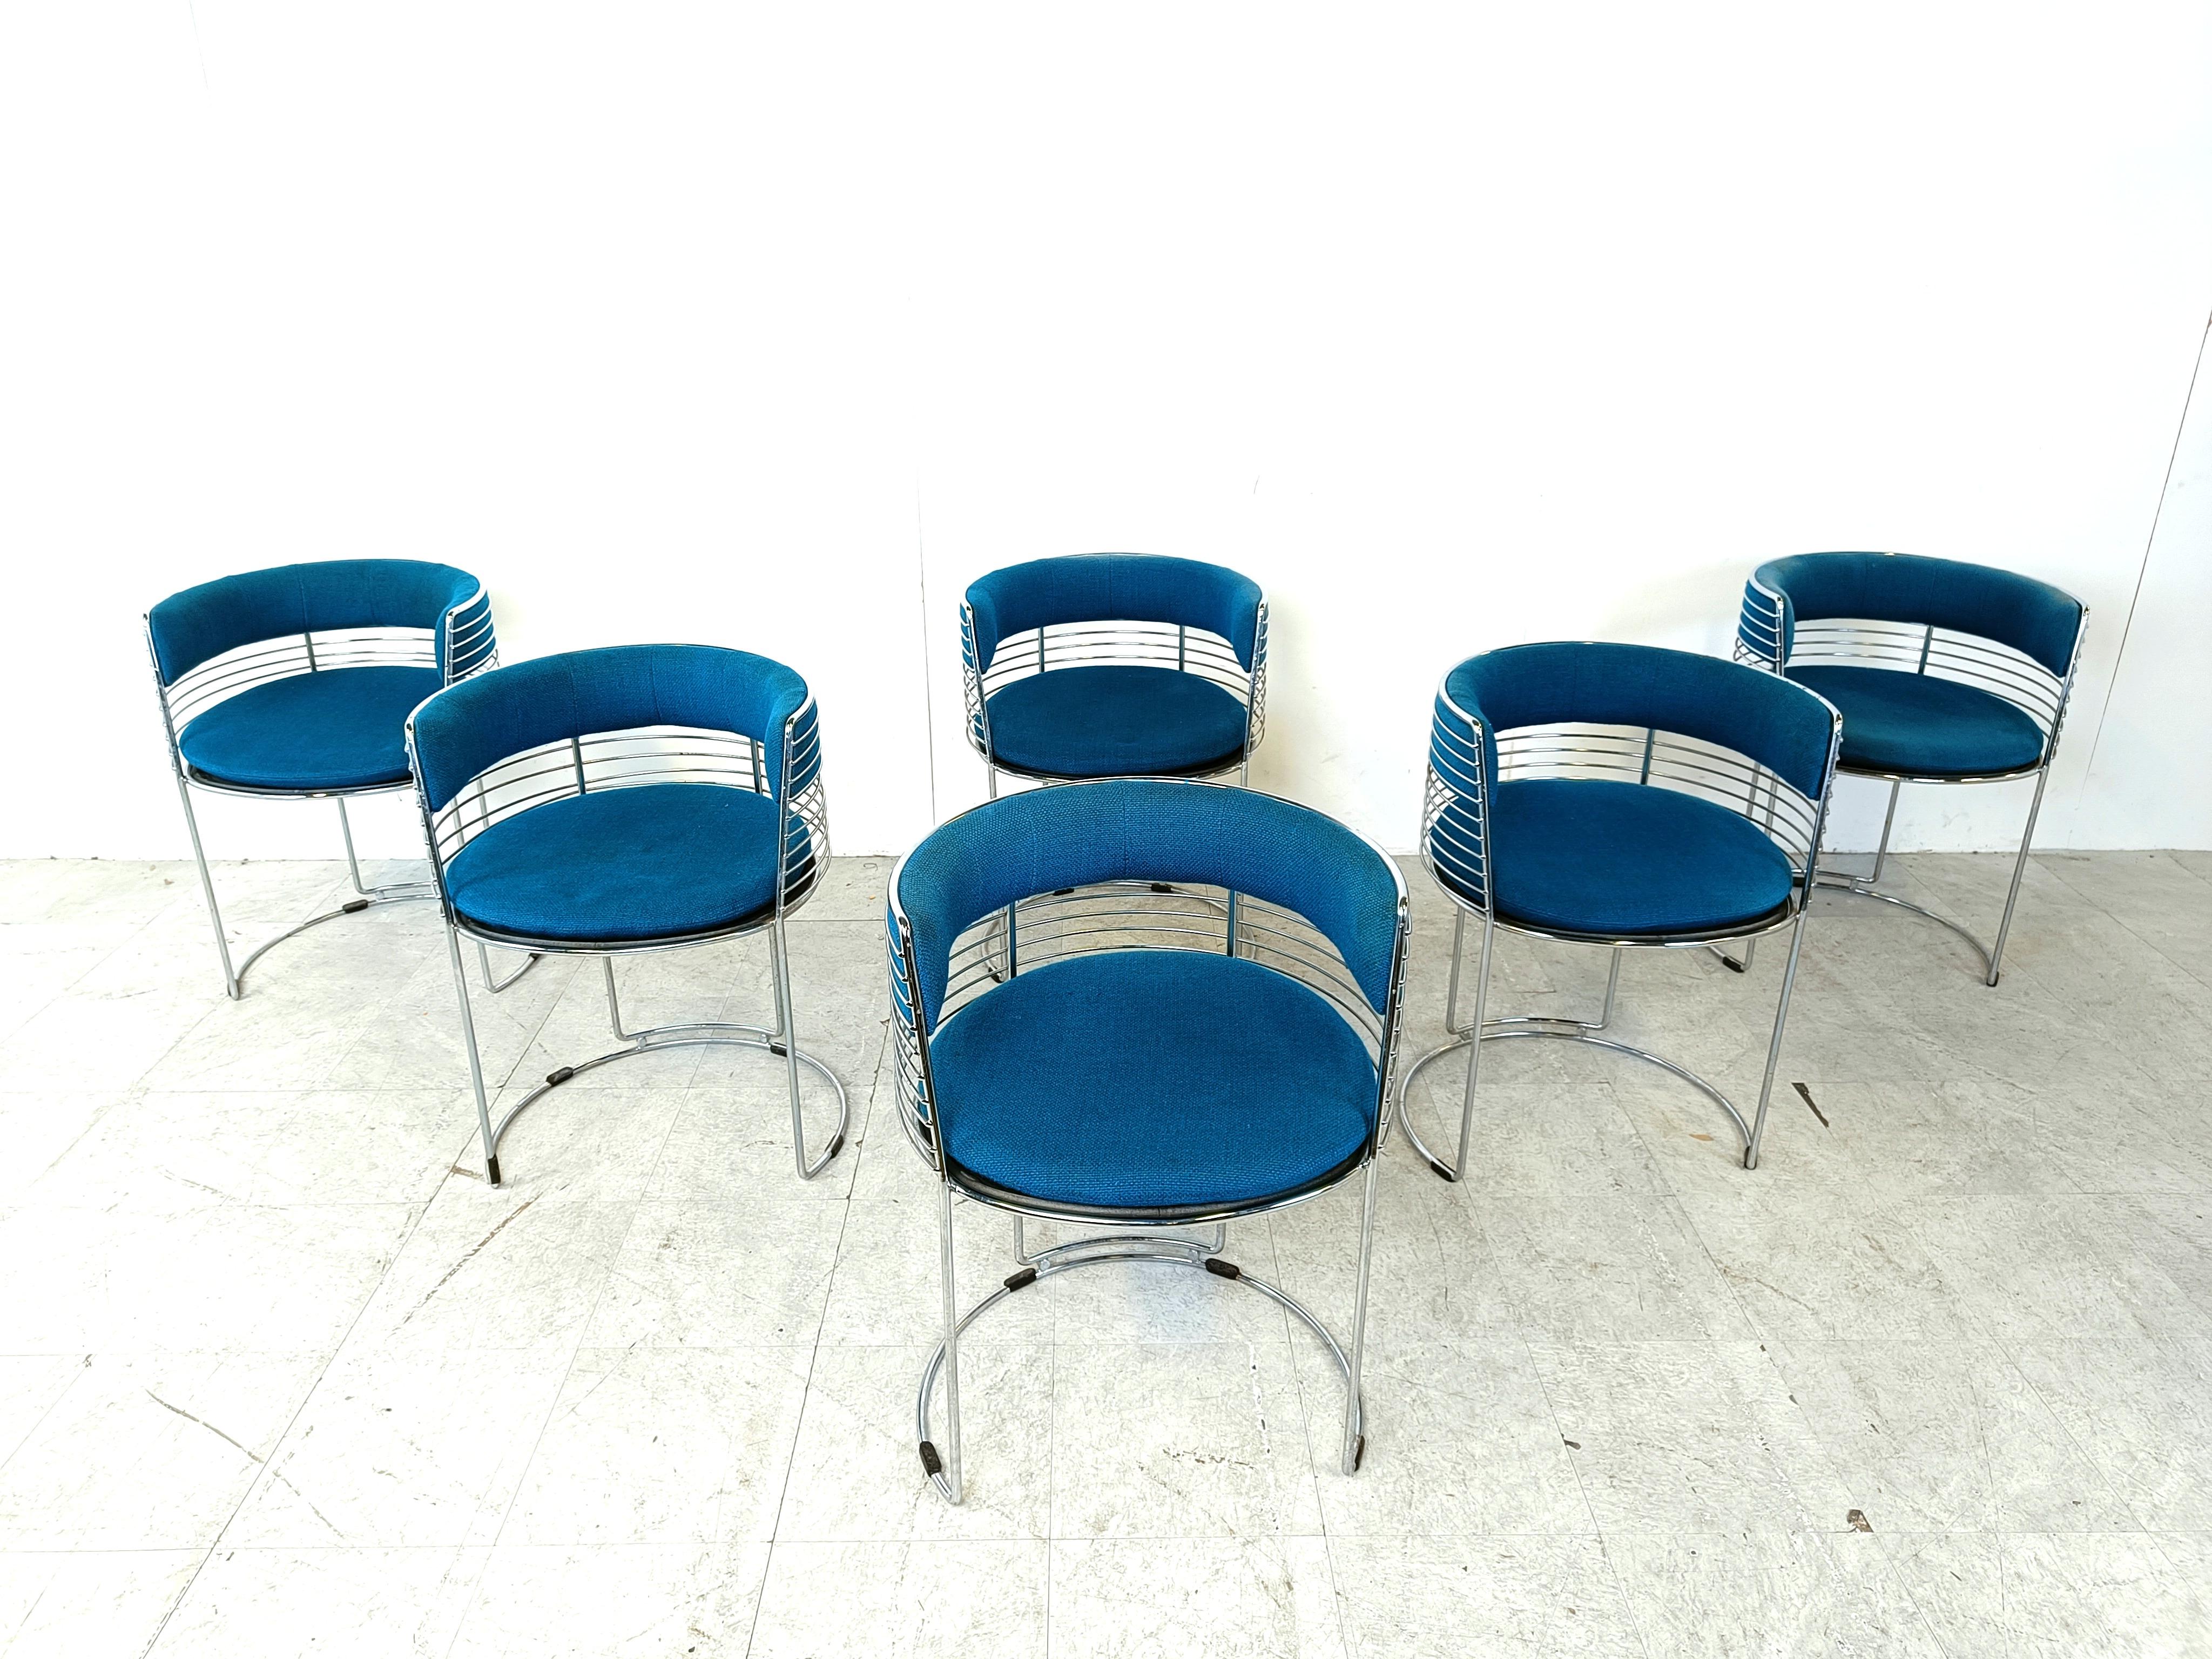 Unique space age chrome wire dining chairs with blue fabric upholstery.

The fabric is still original and contrasts well with the chromed frame.

The timeless design will fit in almost any interior and will be a talking point.

1970s -